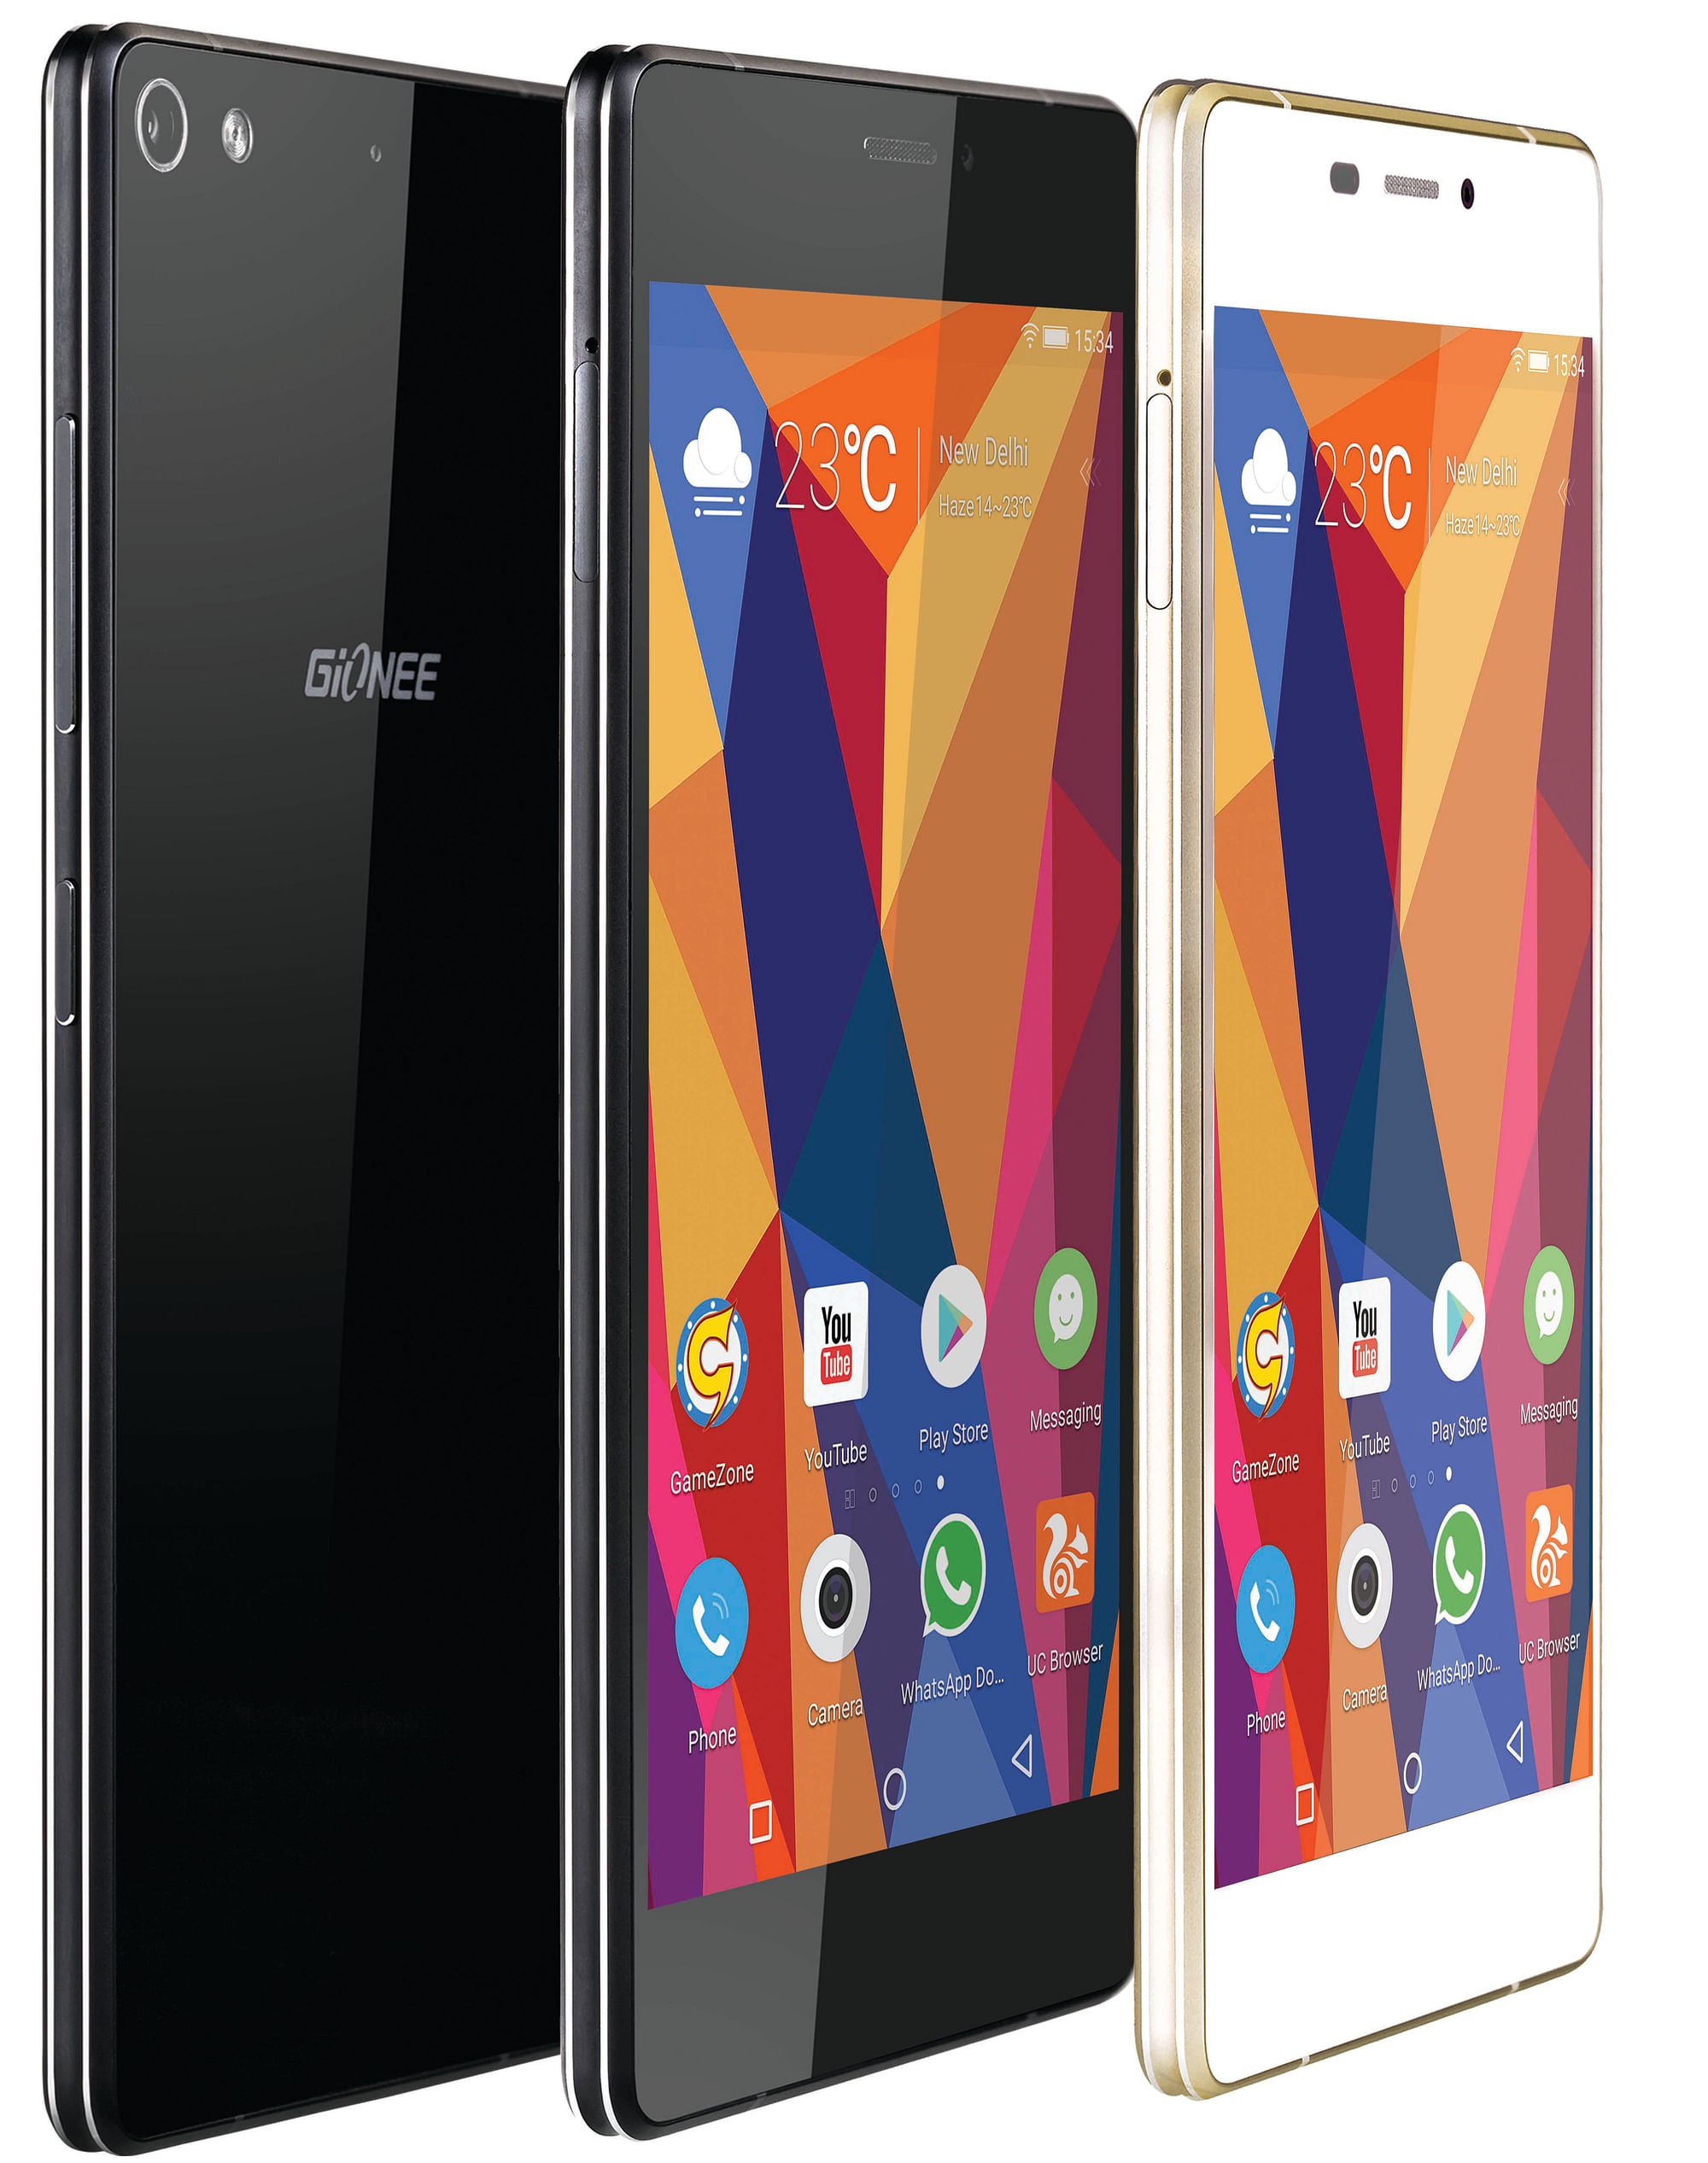 Gionee ELIFE S7 looks good and is ultra thin at 5.5 mm.